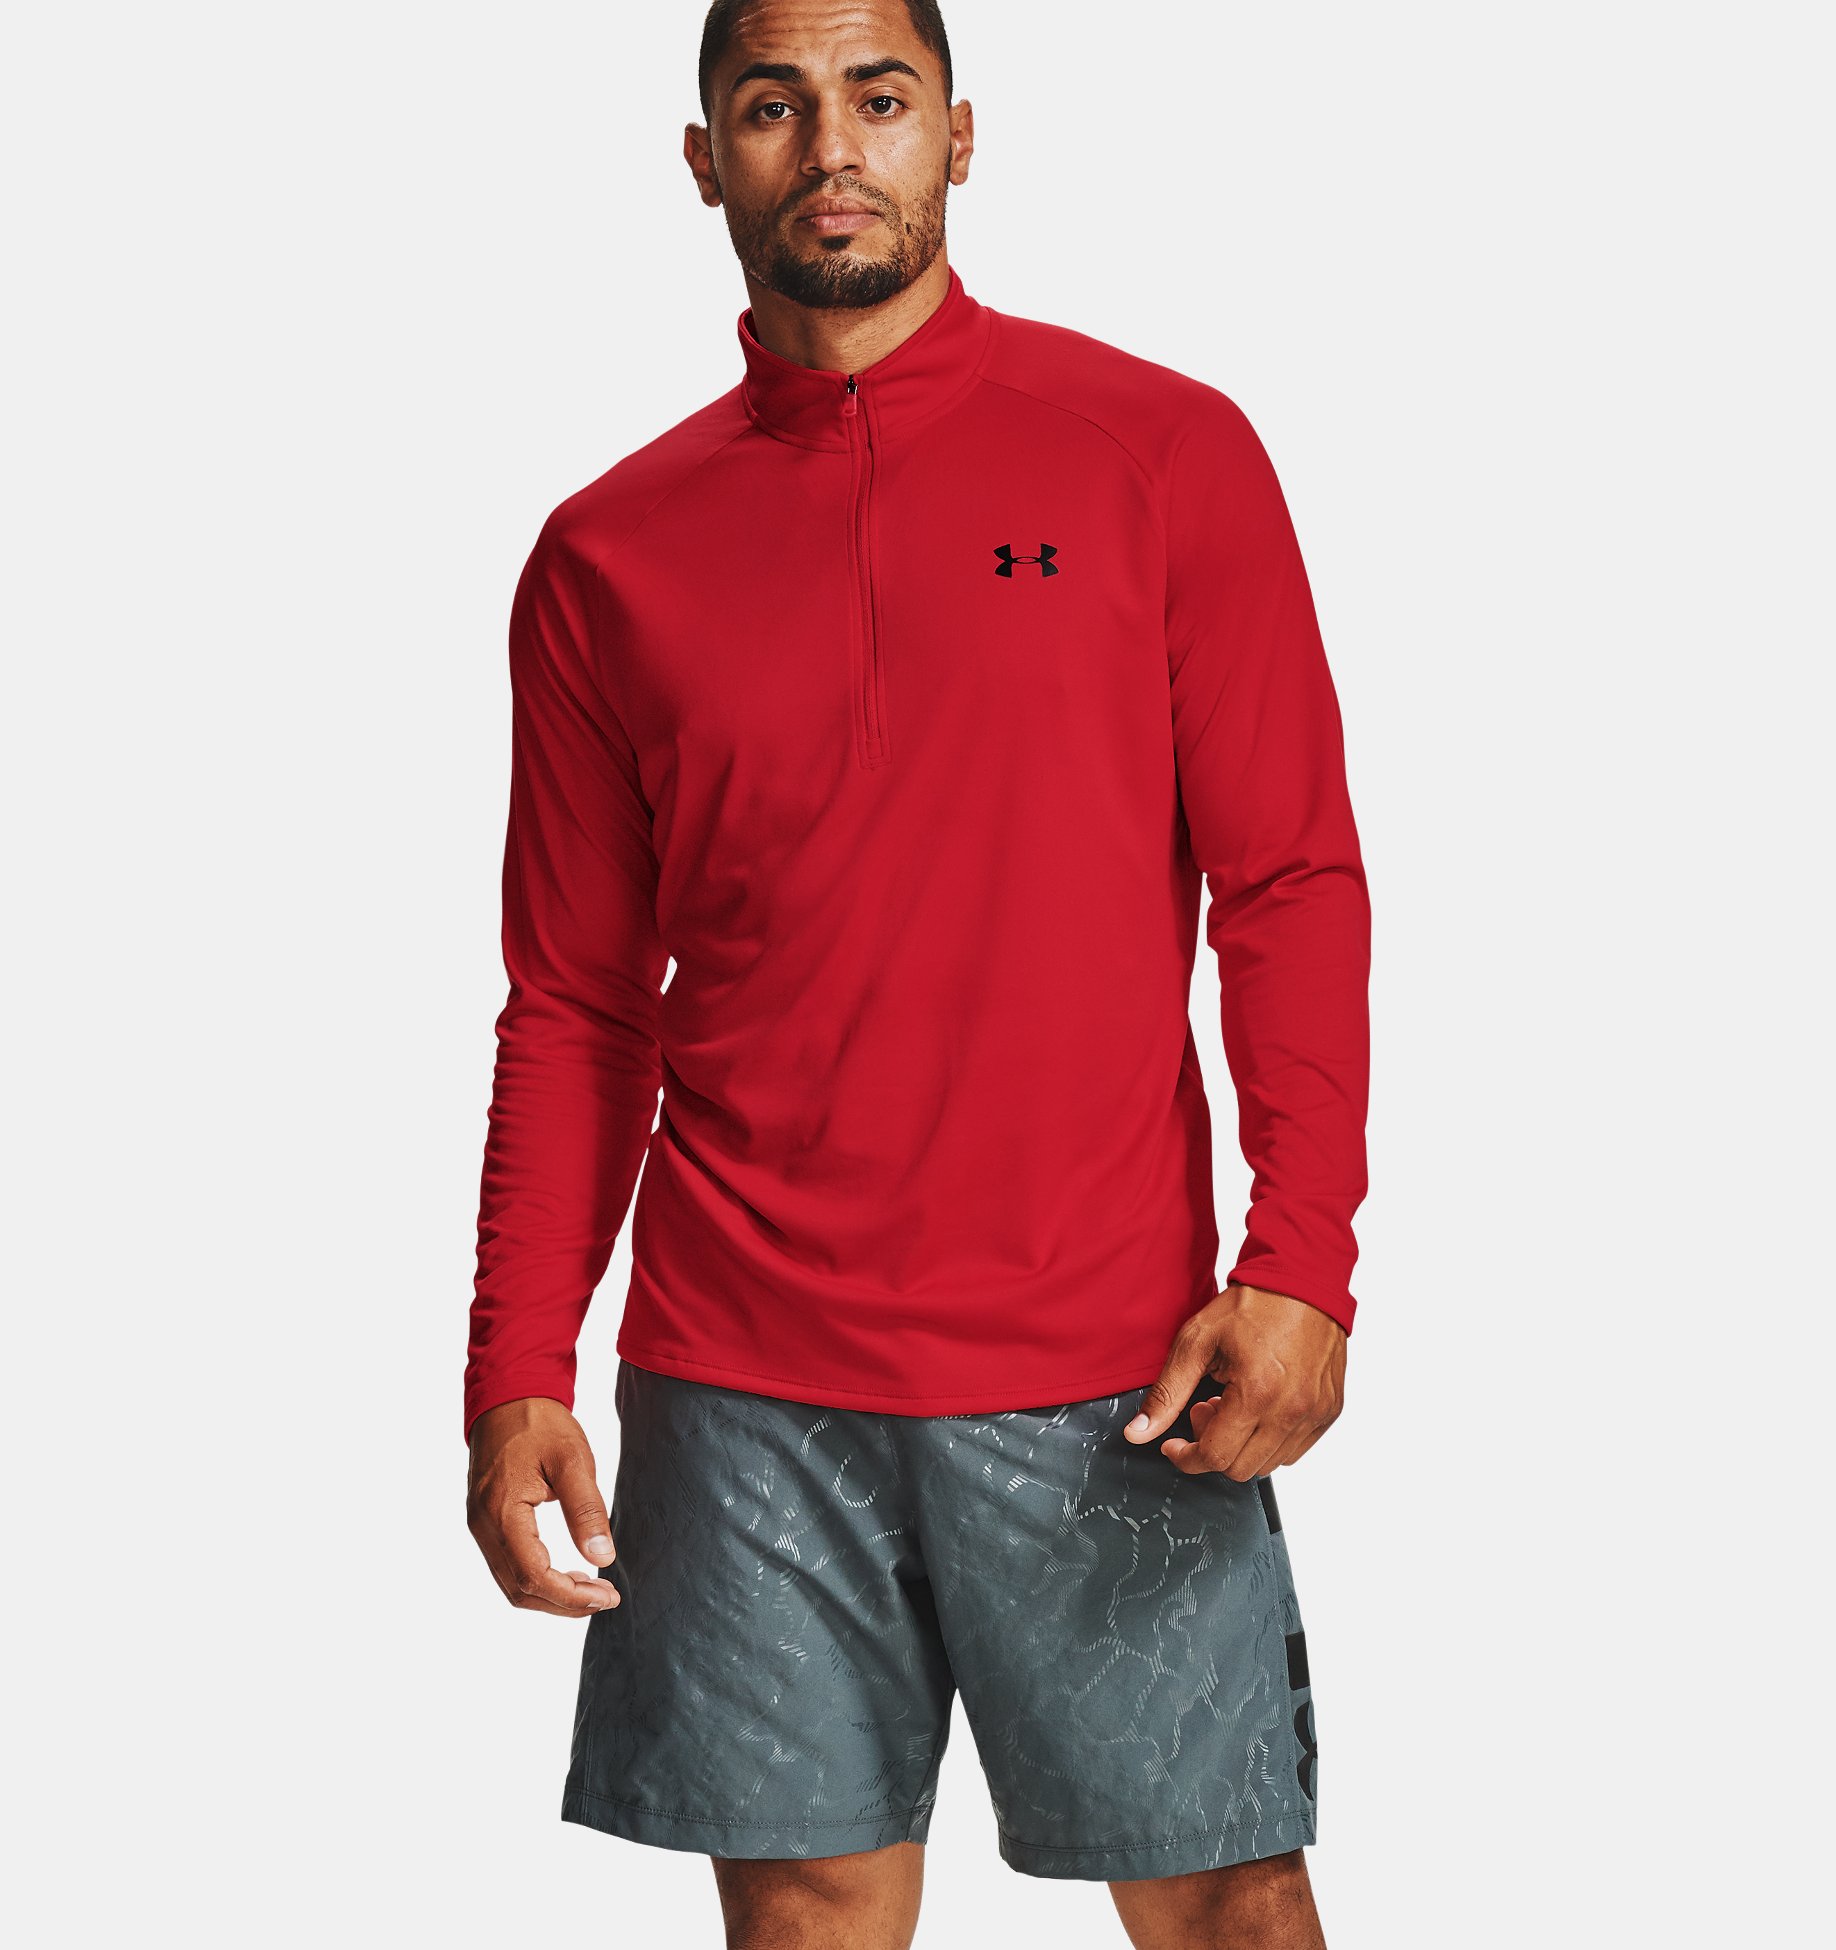 Under Armour Mens Tech 2.0 Long-Sleeve Sporty and Breathable Warm Up Top with Anti-Odour Technology Quick-Drying Zip Up Top for Men 